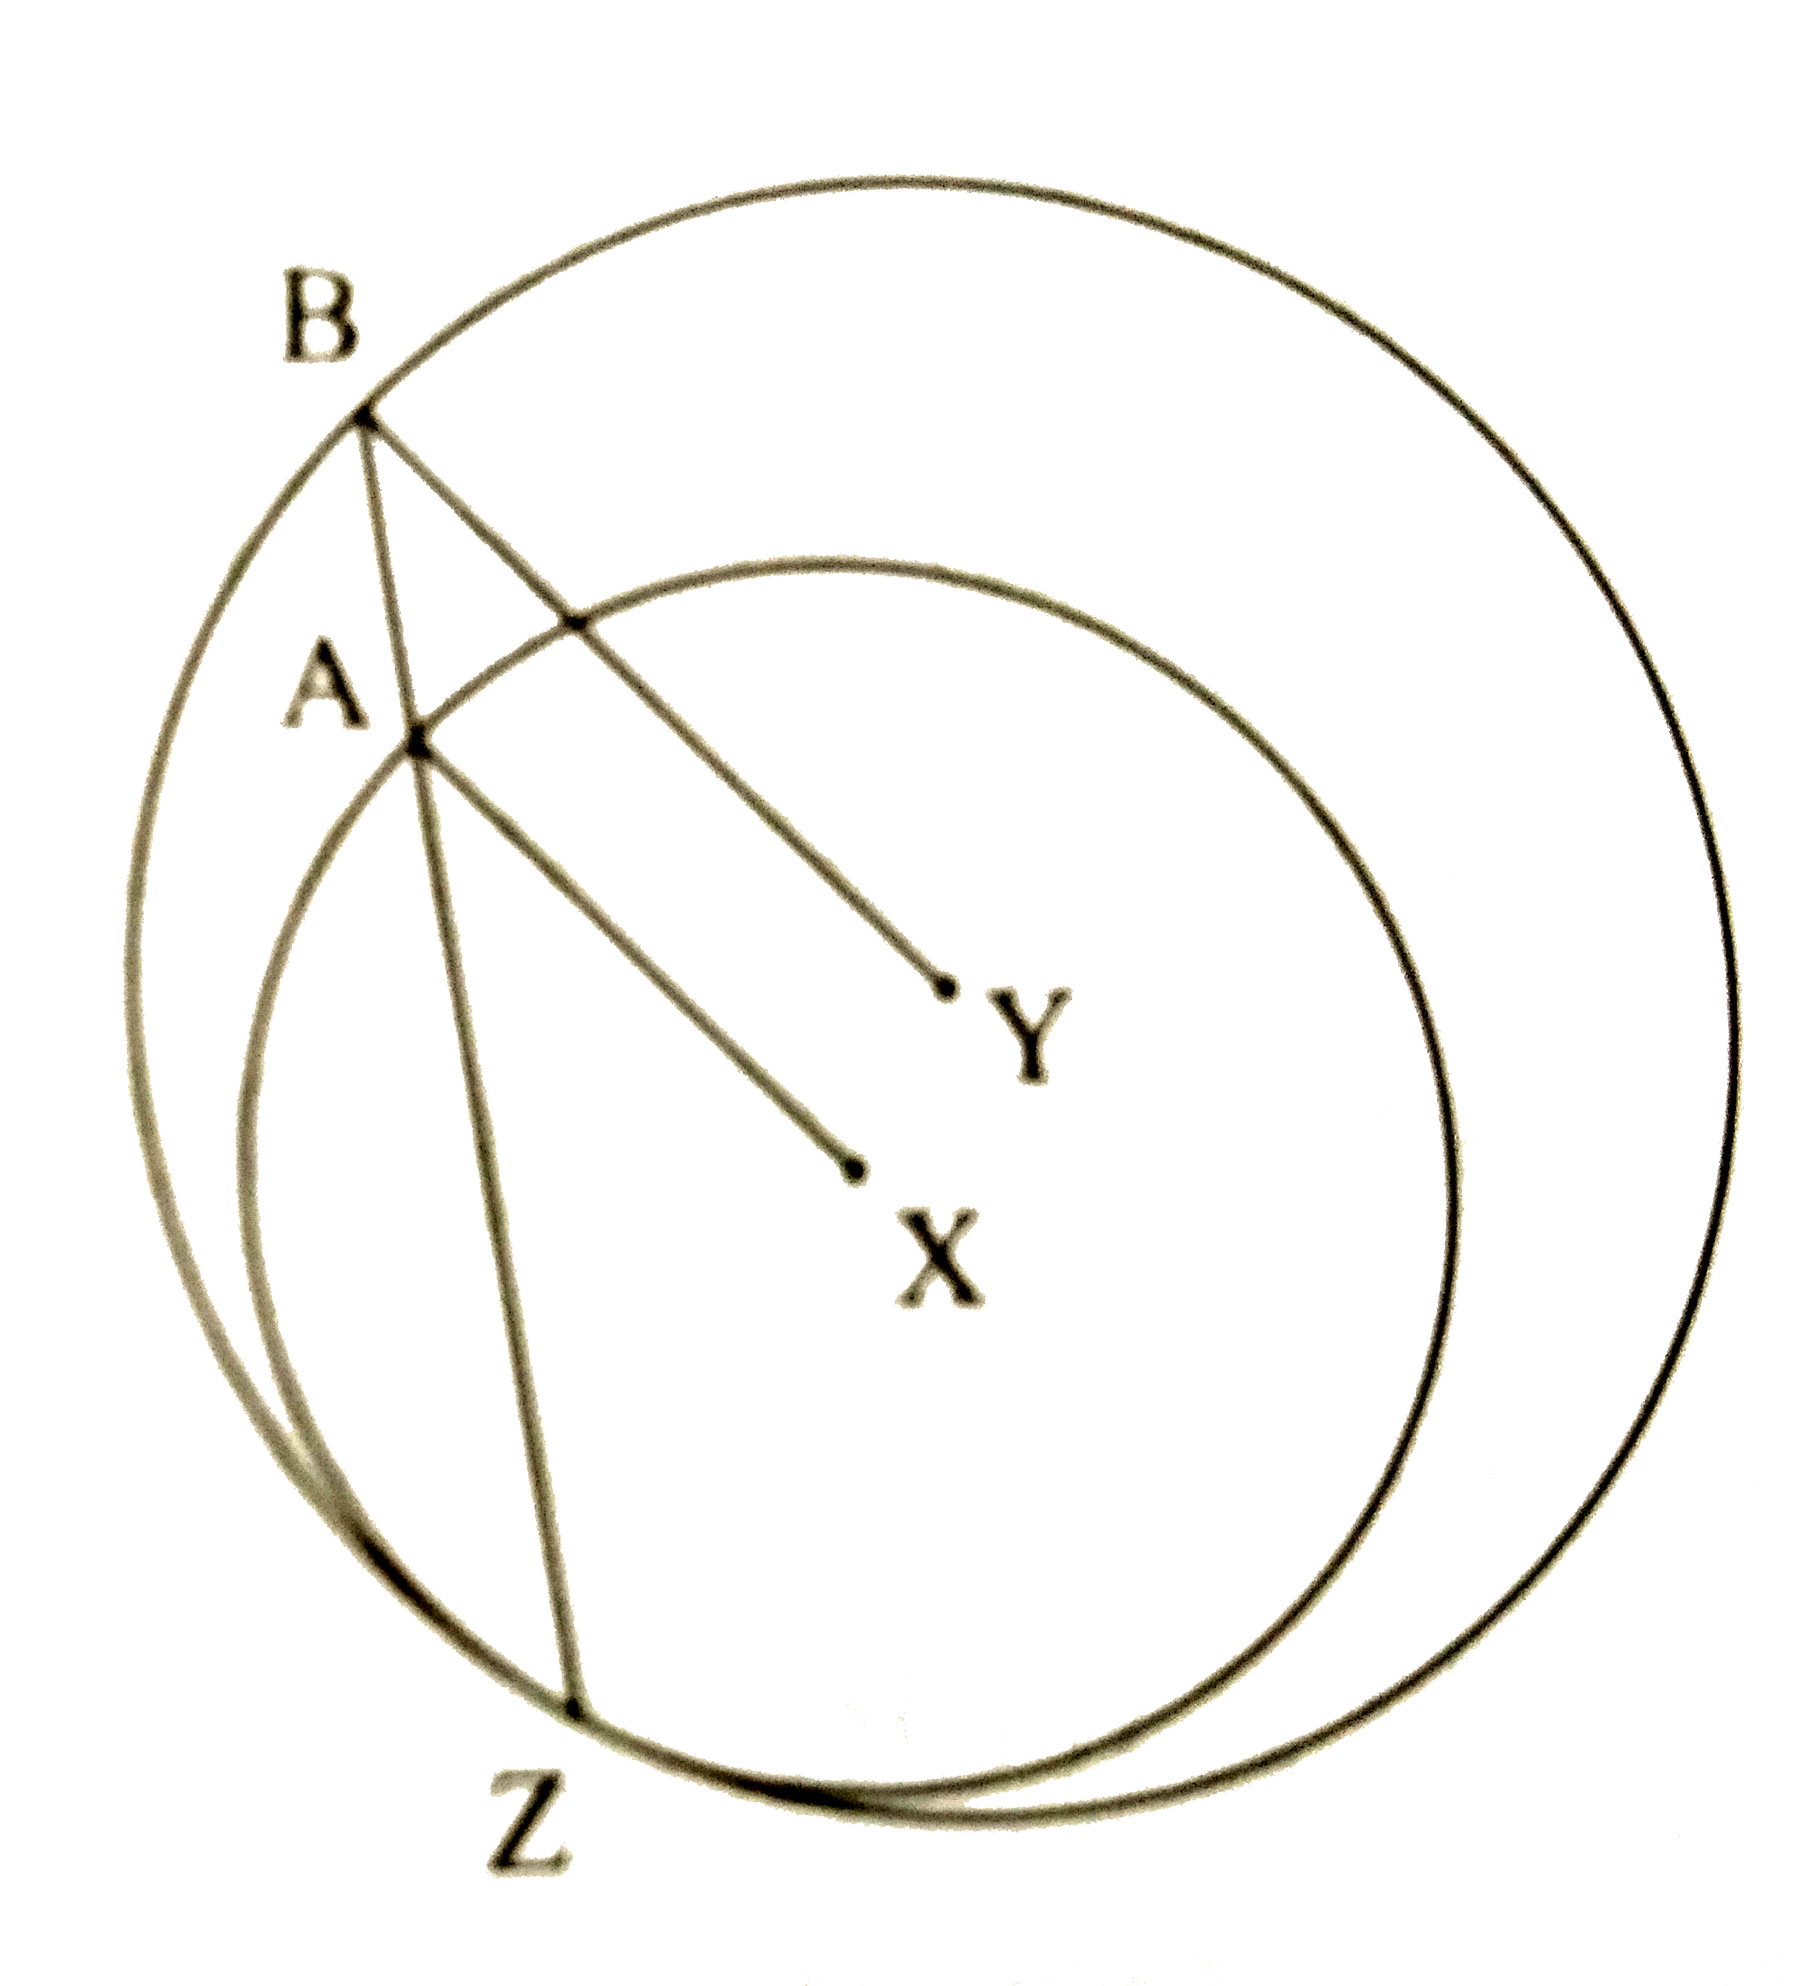 In the figure , circles with centres X and Y touch  internally at point Z. Seg BZ is the chord  of bigger circle and it intersects smaller k circle at point A.   Prove that seg AX || seg  BY.